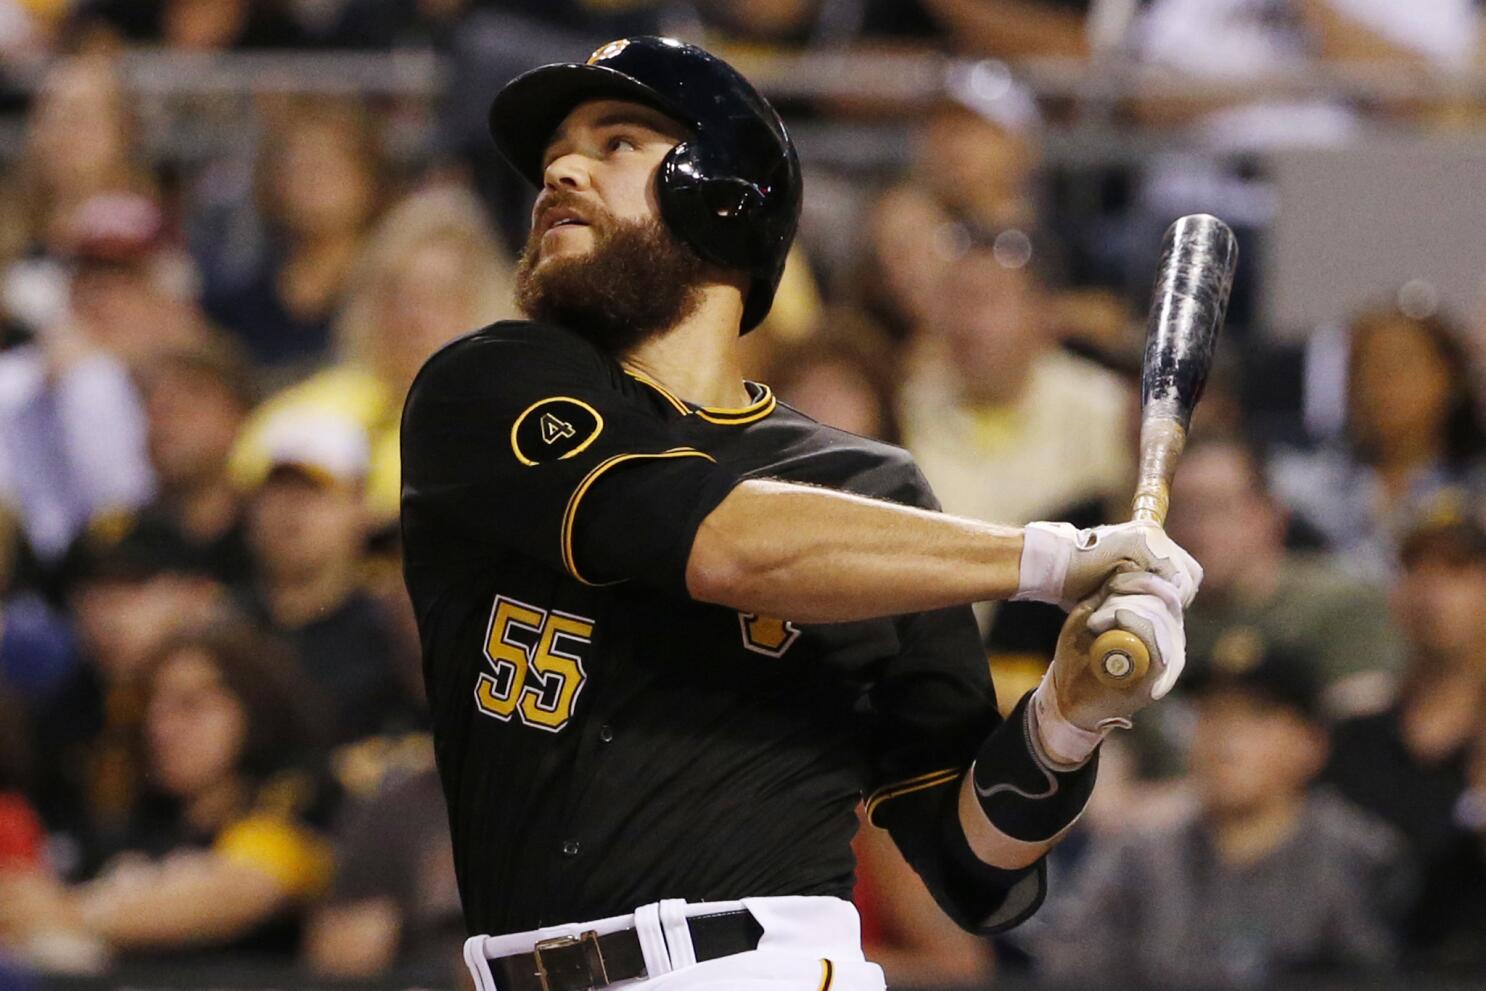 Russell Martin - Pirates Prospects